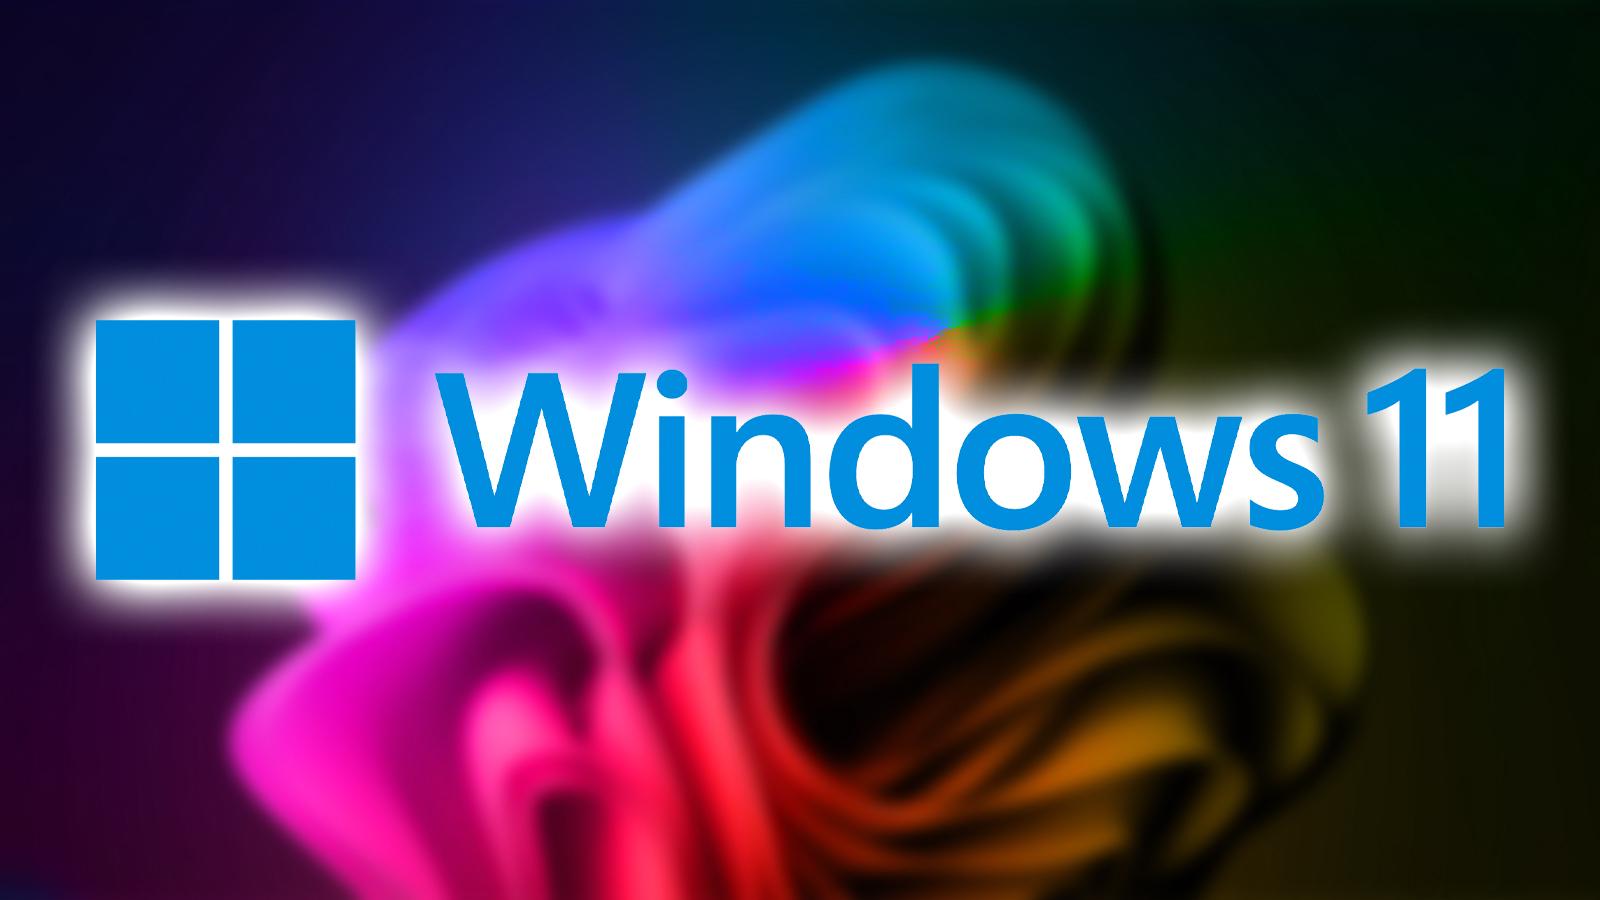 windows 11 logo on top of background with gradient rainbow